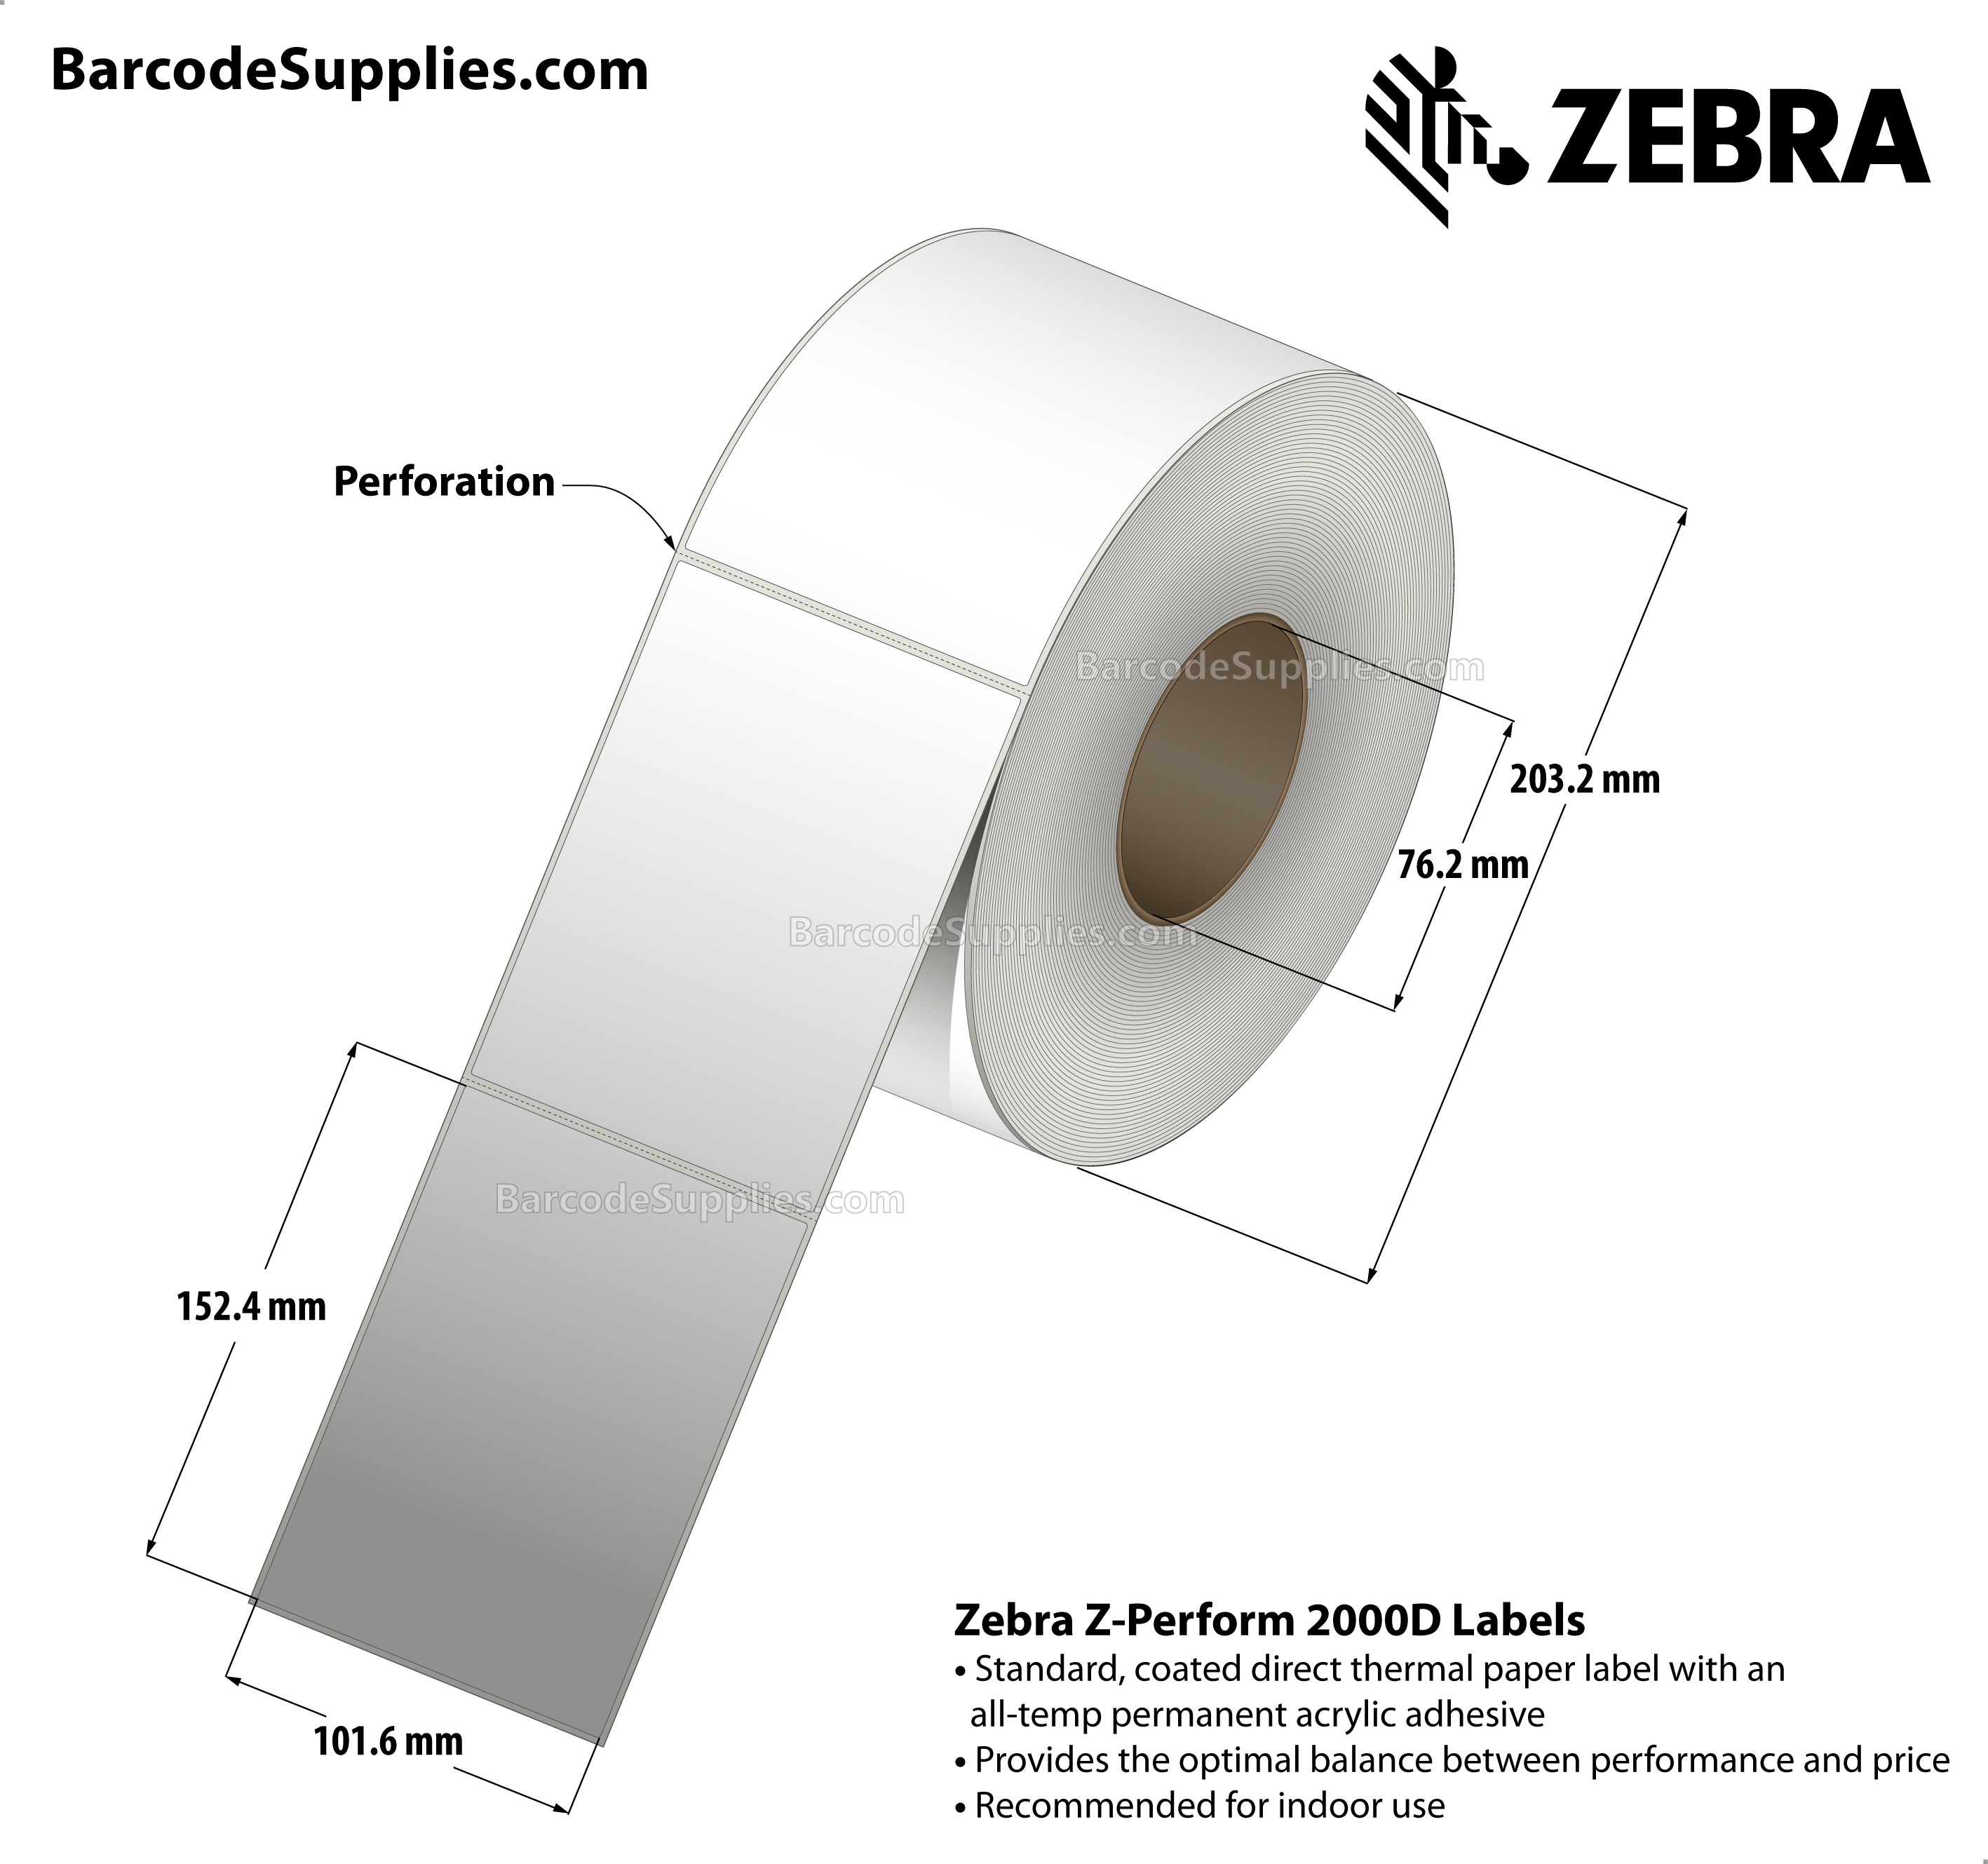 4 x 6 Direct Thermal White Z-Perform 2000D Labels With All-Temp Adhesive - Perforated - 1000 Labels Per Roll - Carton Of 4 Rolls - 4000 Labels Total - MPN: 10000290